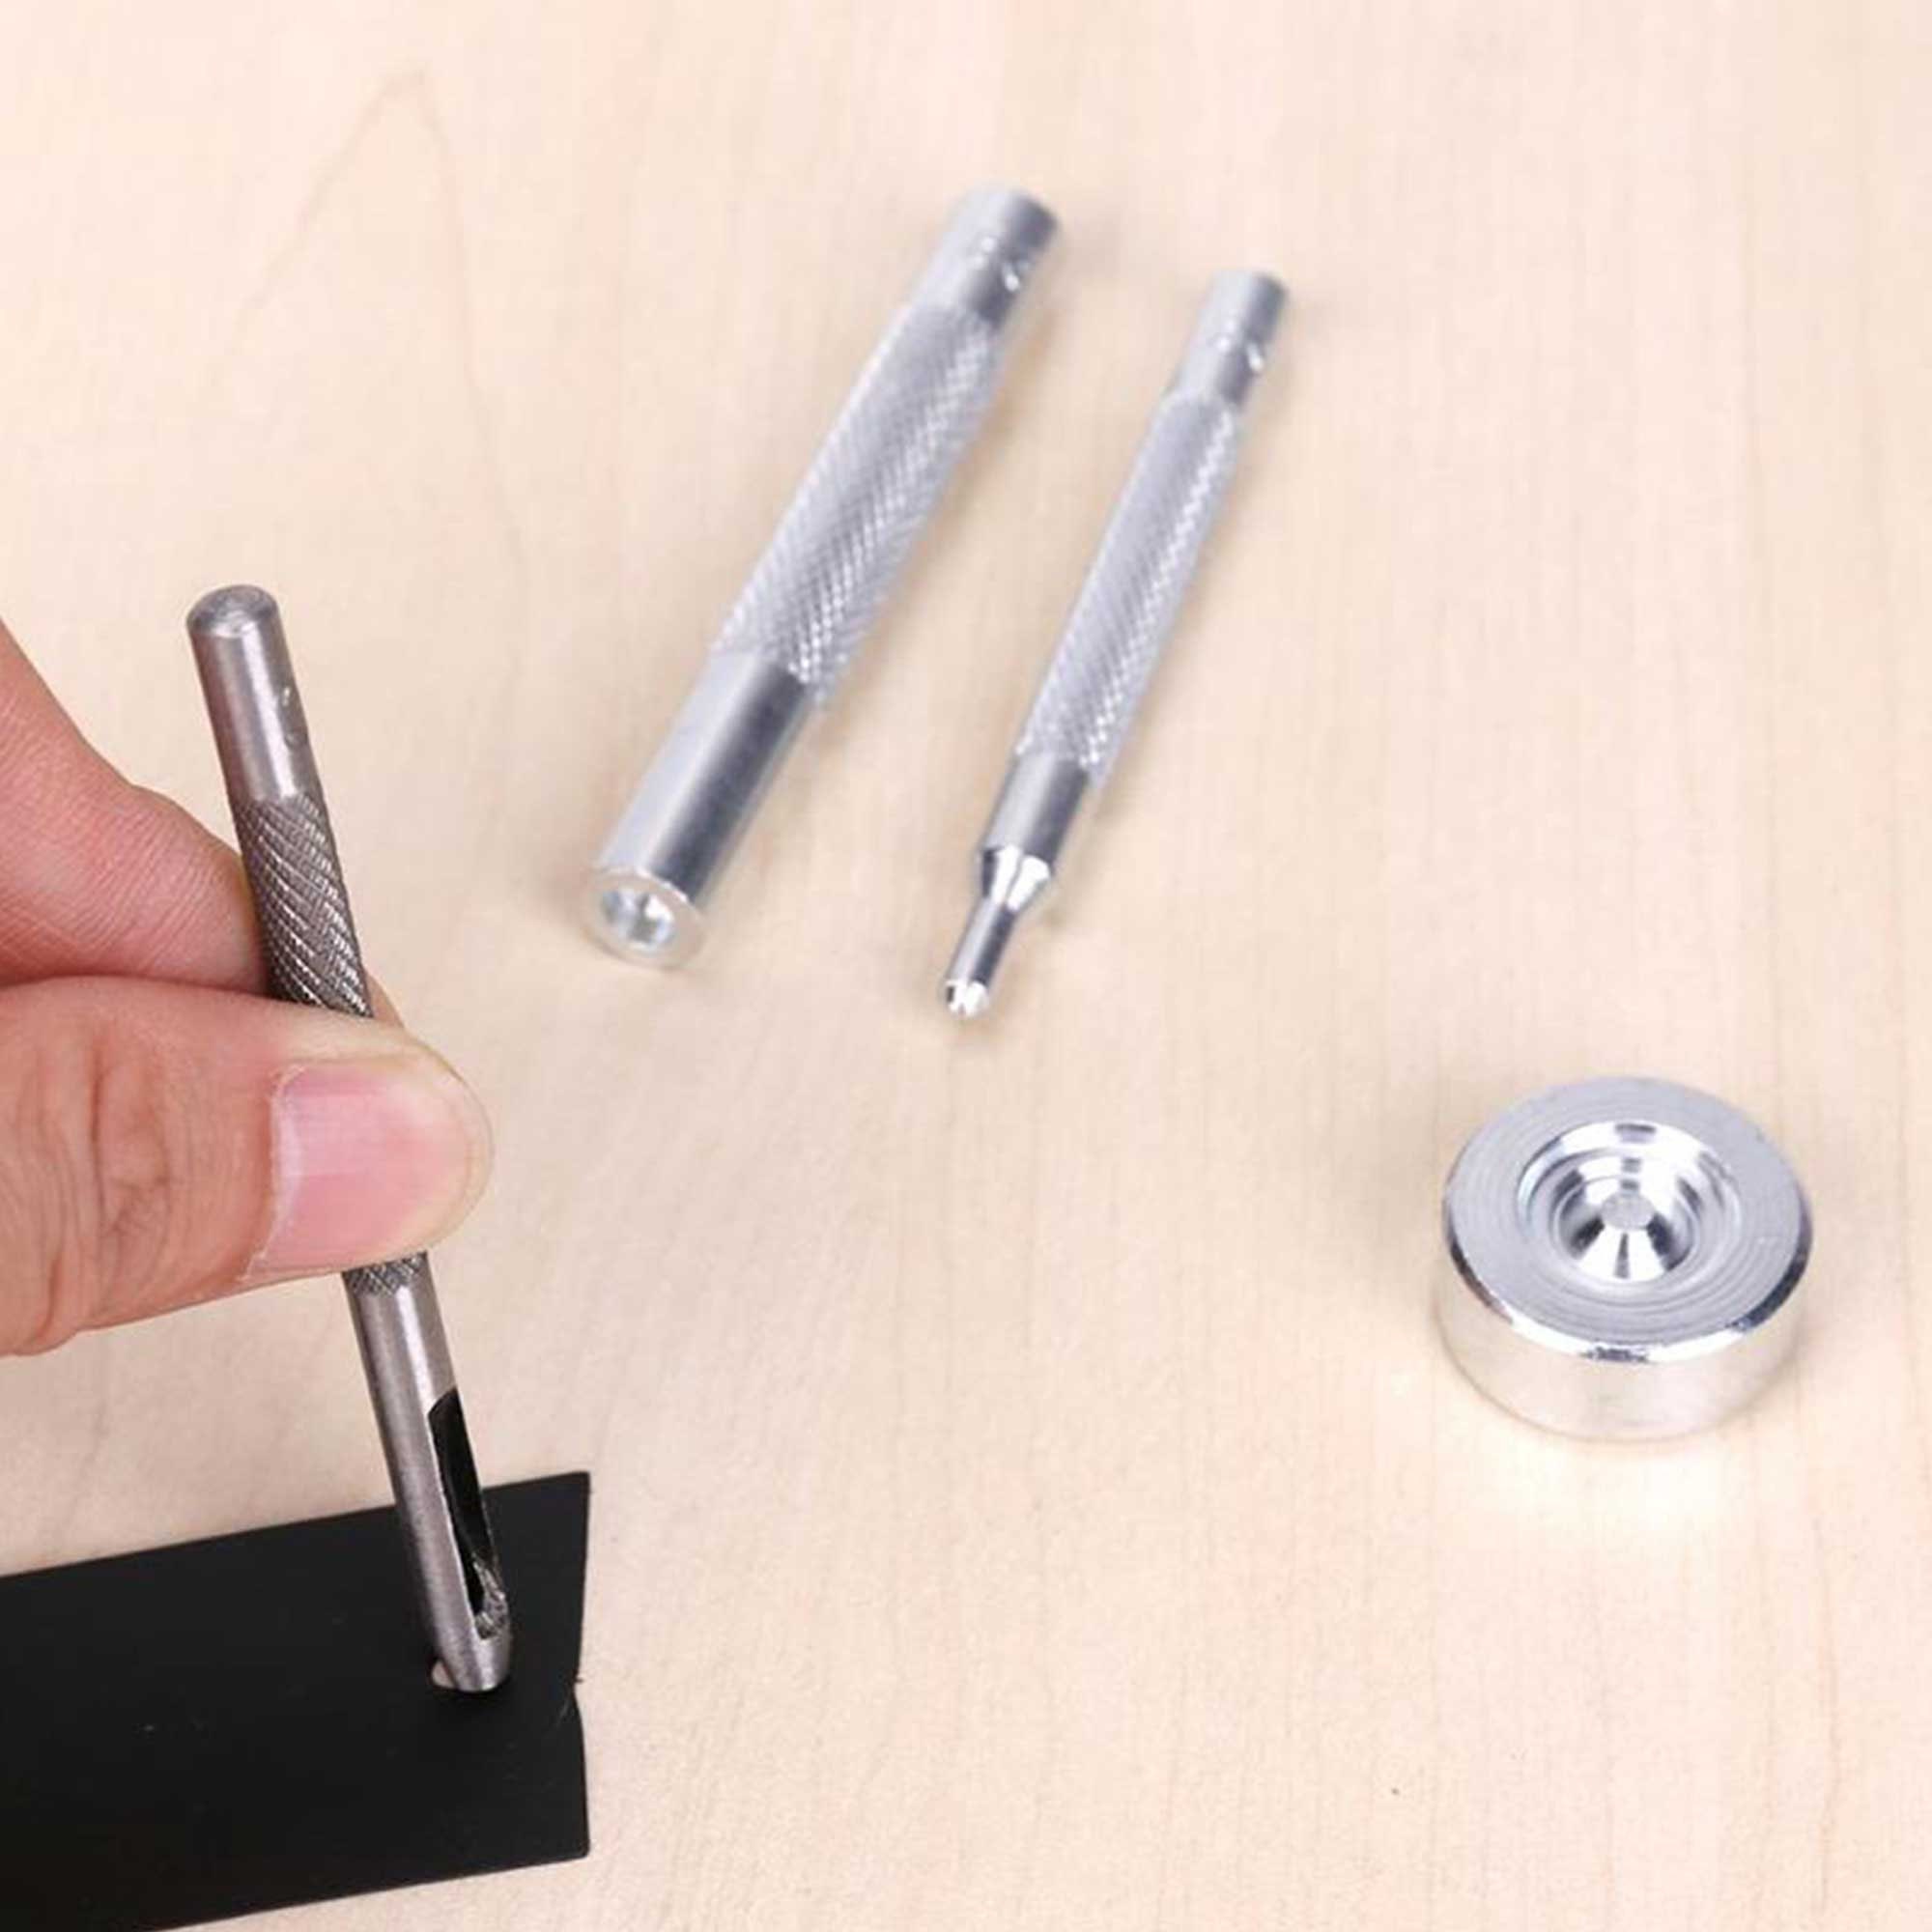 DIY Buttons Installation Metal Tools Snap Fasteners Buttons Rivets Press  Studs Hand Punch Tool Set Kit for Leather Crafts 